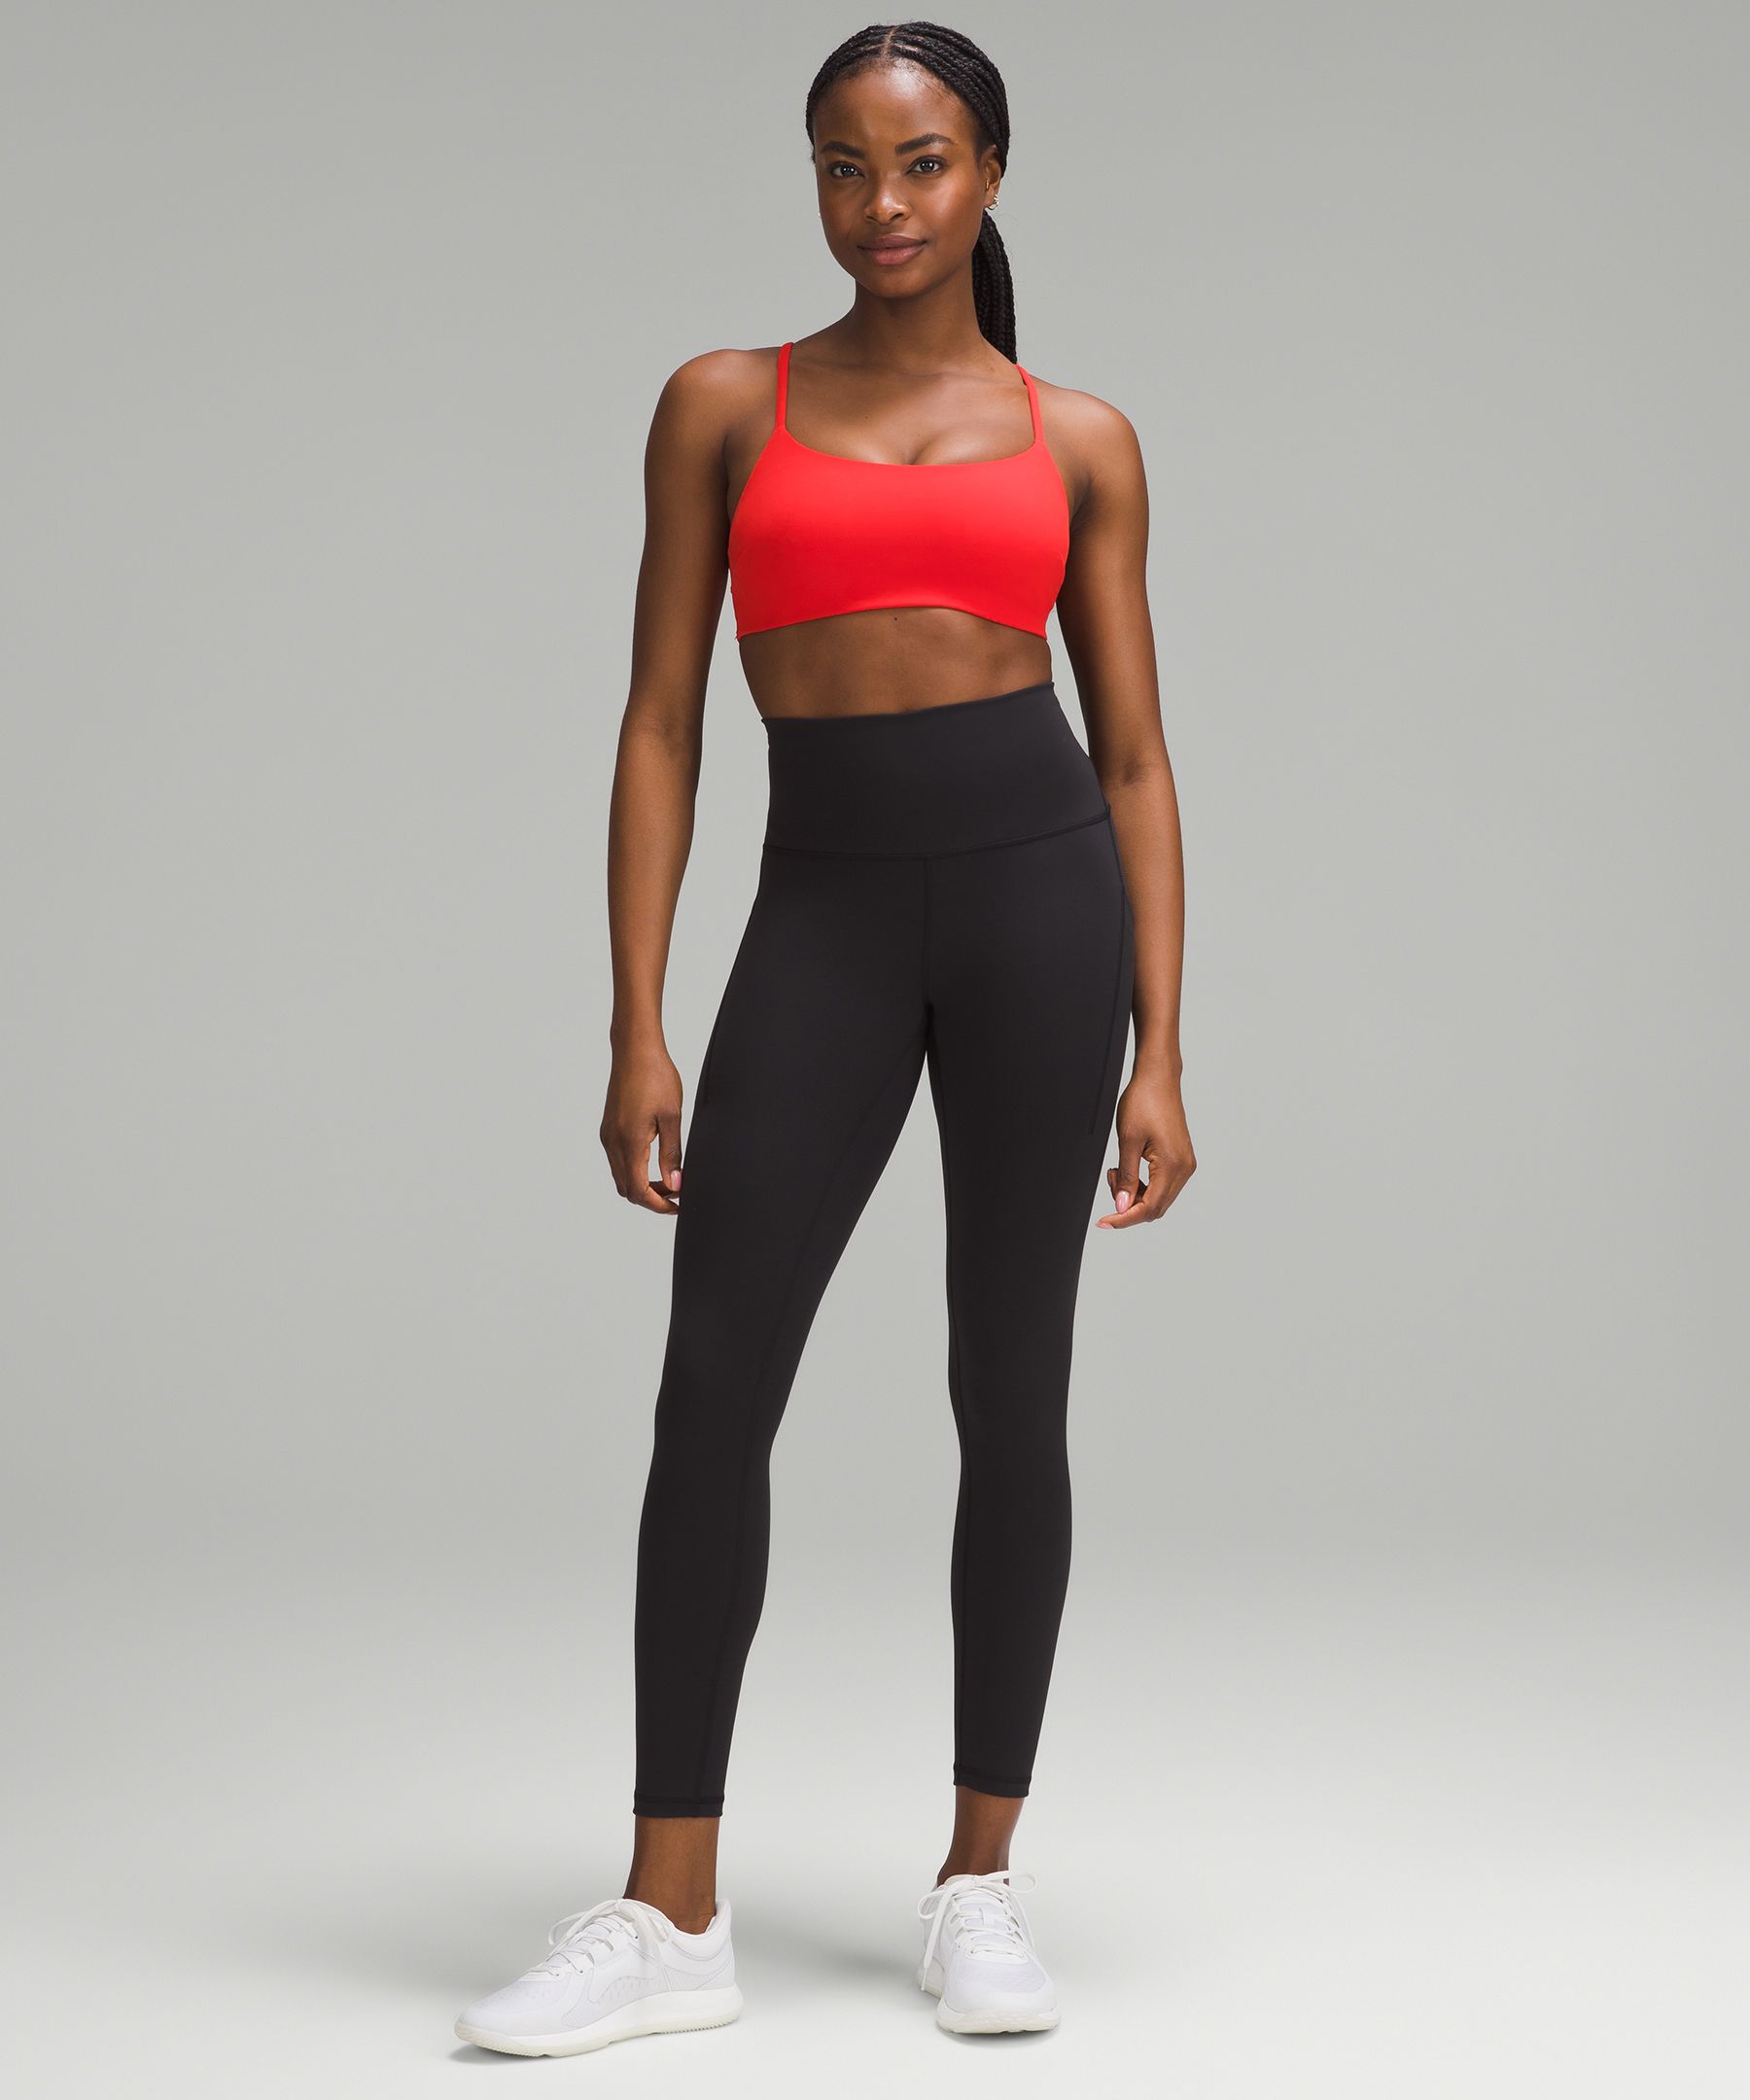 lululemon Unveils the Flow Y Strappy Bra: The Ultimate in Comfort